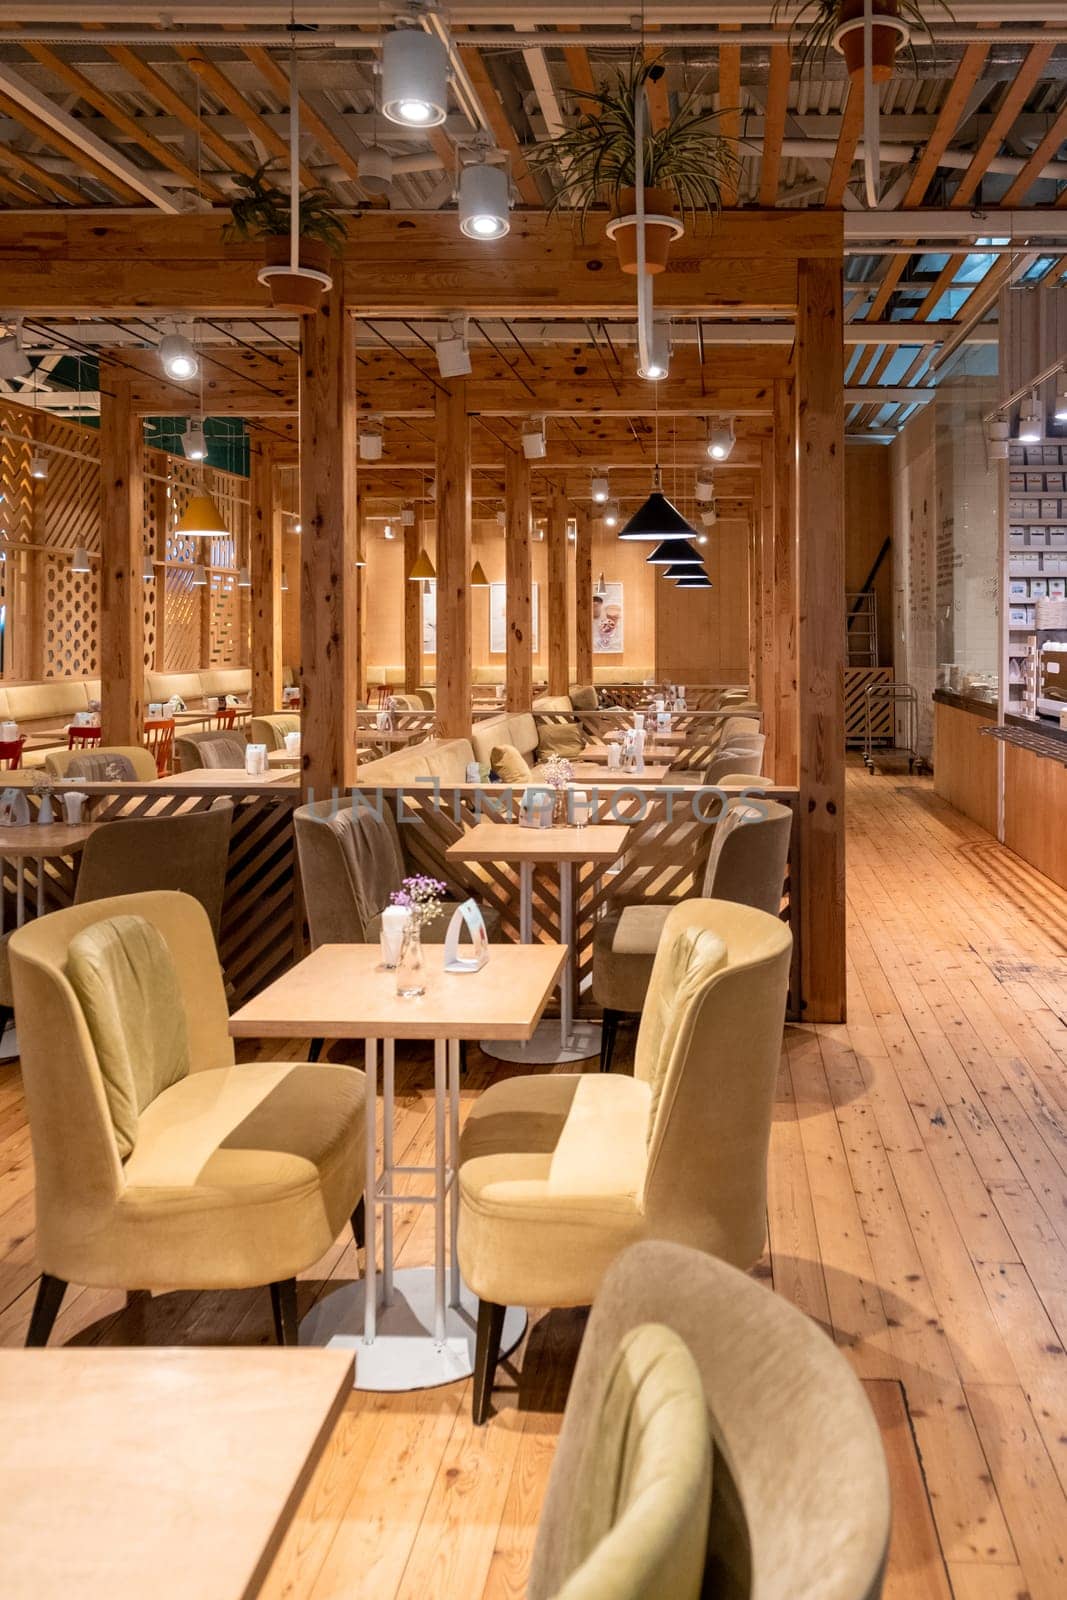 Loft style restaurant with textured wooden walls. Cafe restaurant in wooden style. There are plenty of tables with chairs and armchairs. Empty coffee without people.